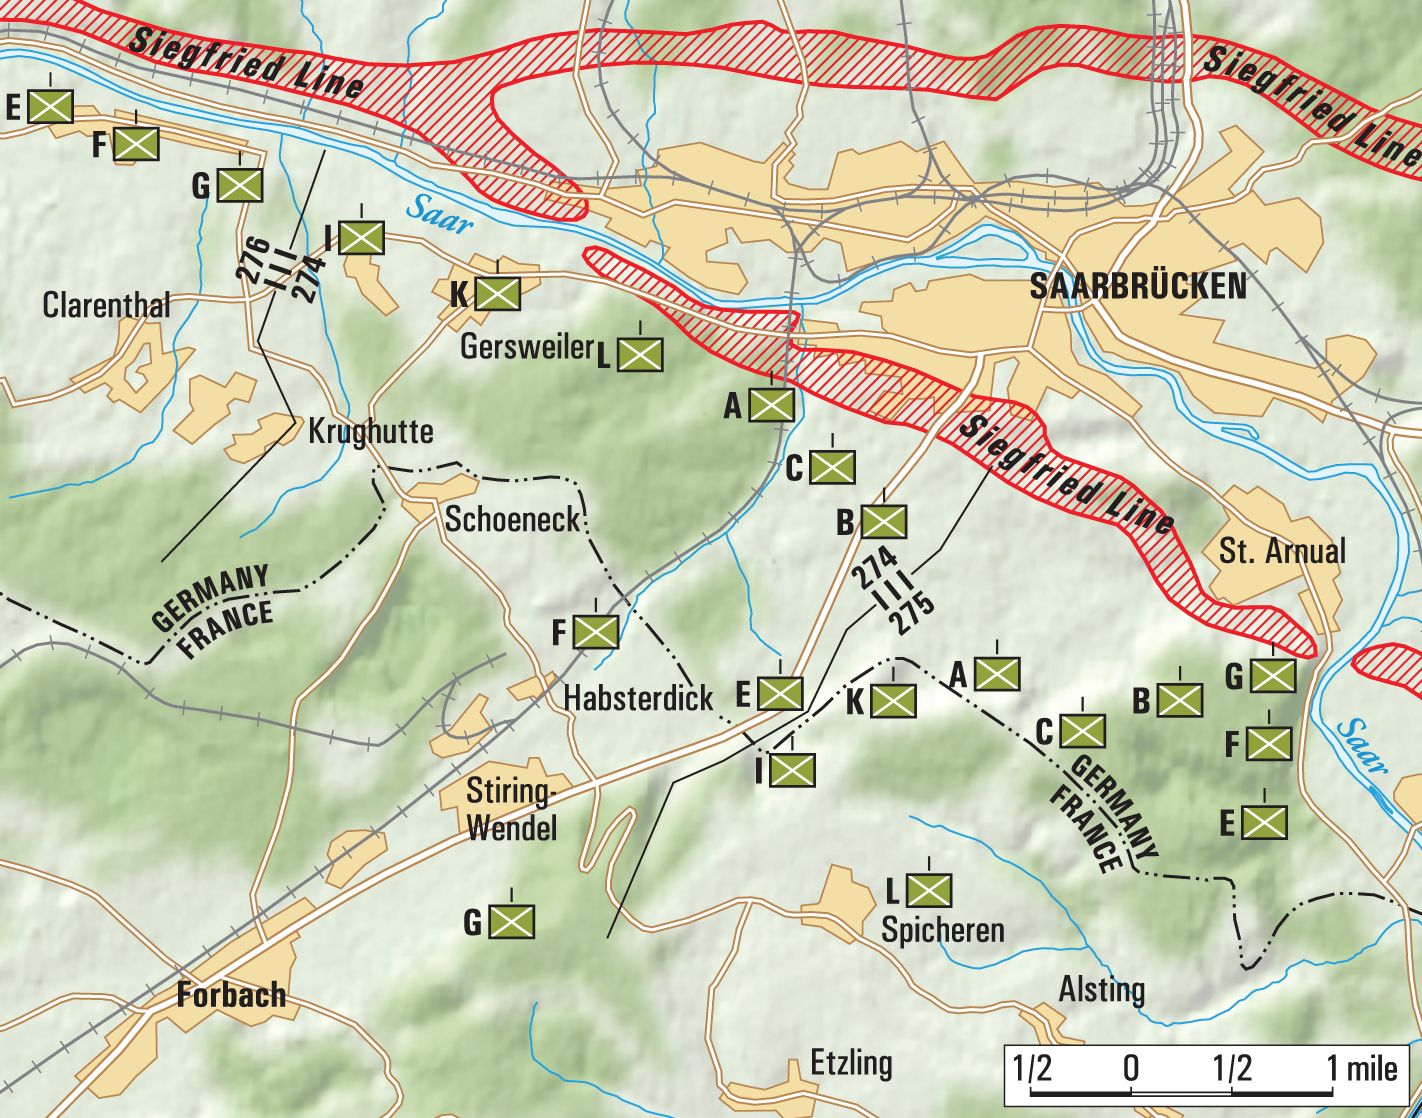 The 70th “Trailblazers” Infantry Division approached Saarbrücken from the southwest through the towns of Gersweiler, Schoeneck, Habsterdick, Stiring-Wendel, and St. Arnual. 